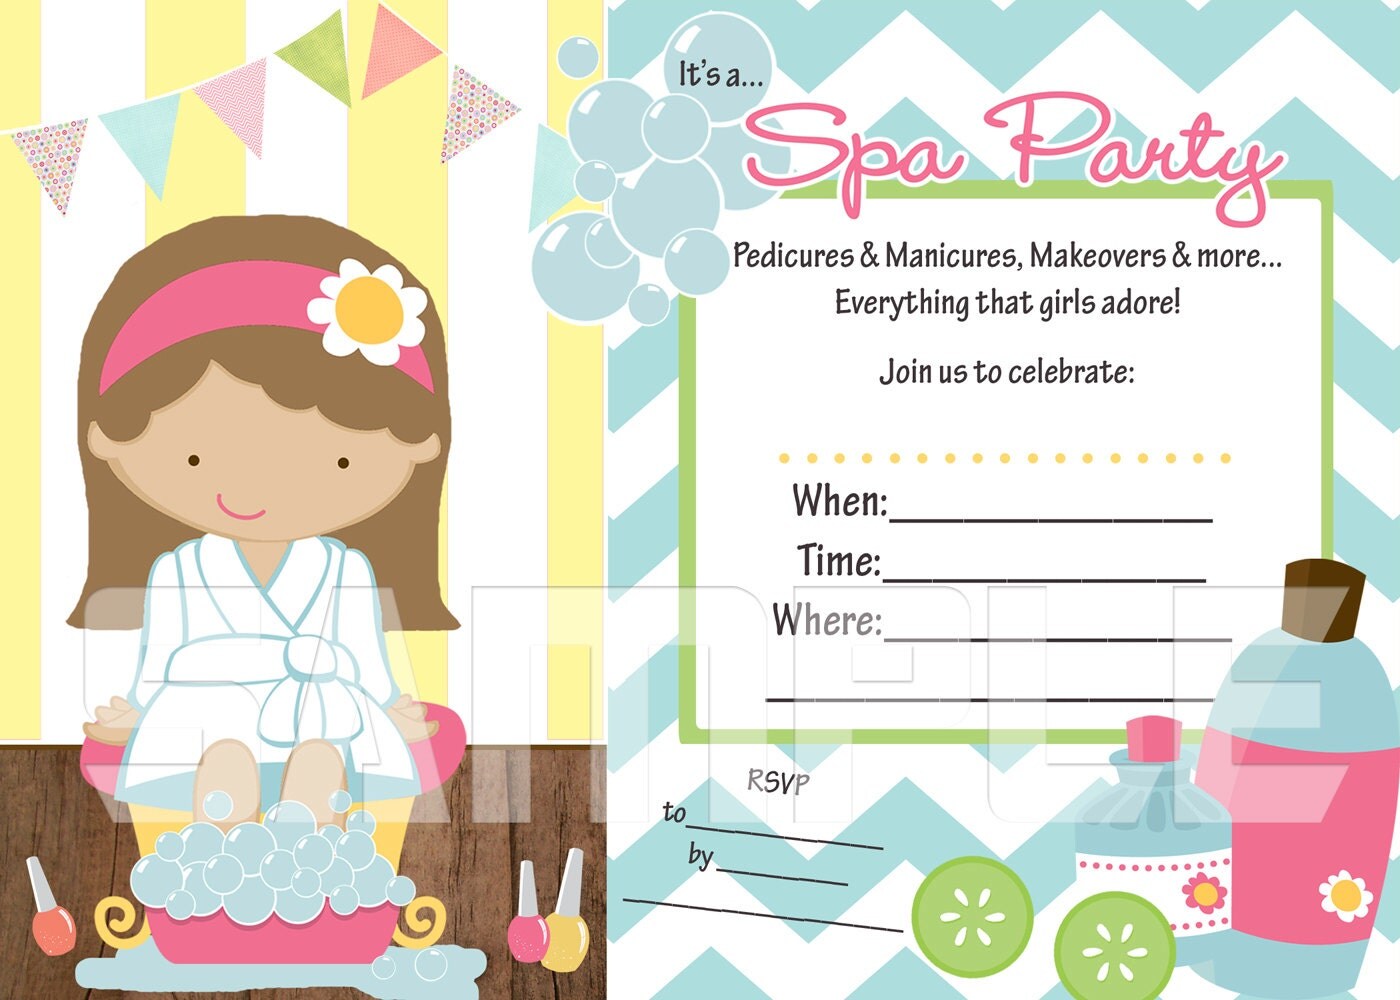 Fill In The Blank Spa Party Printable Invitation By Lilbeansprout